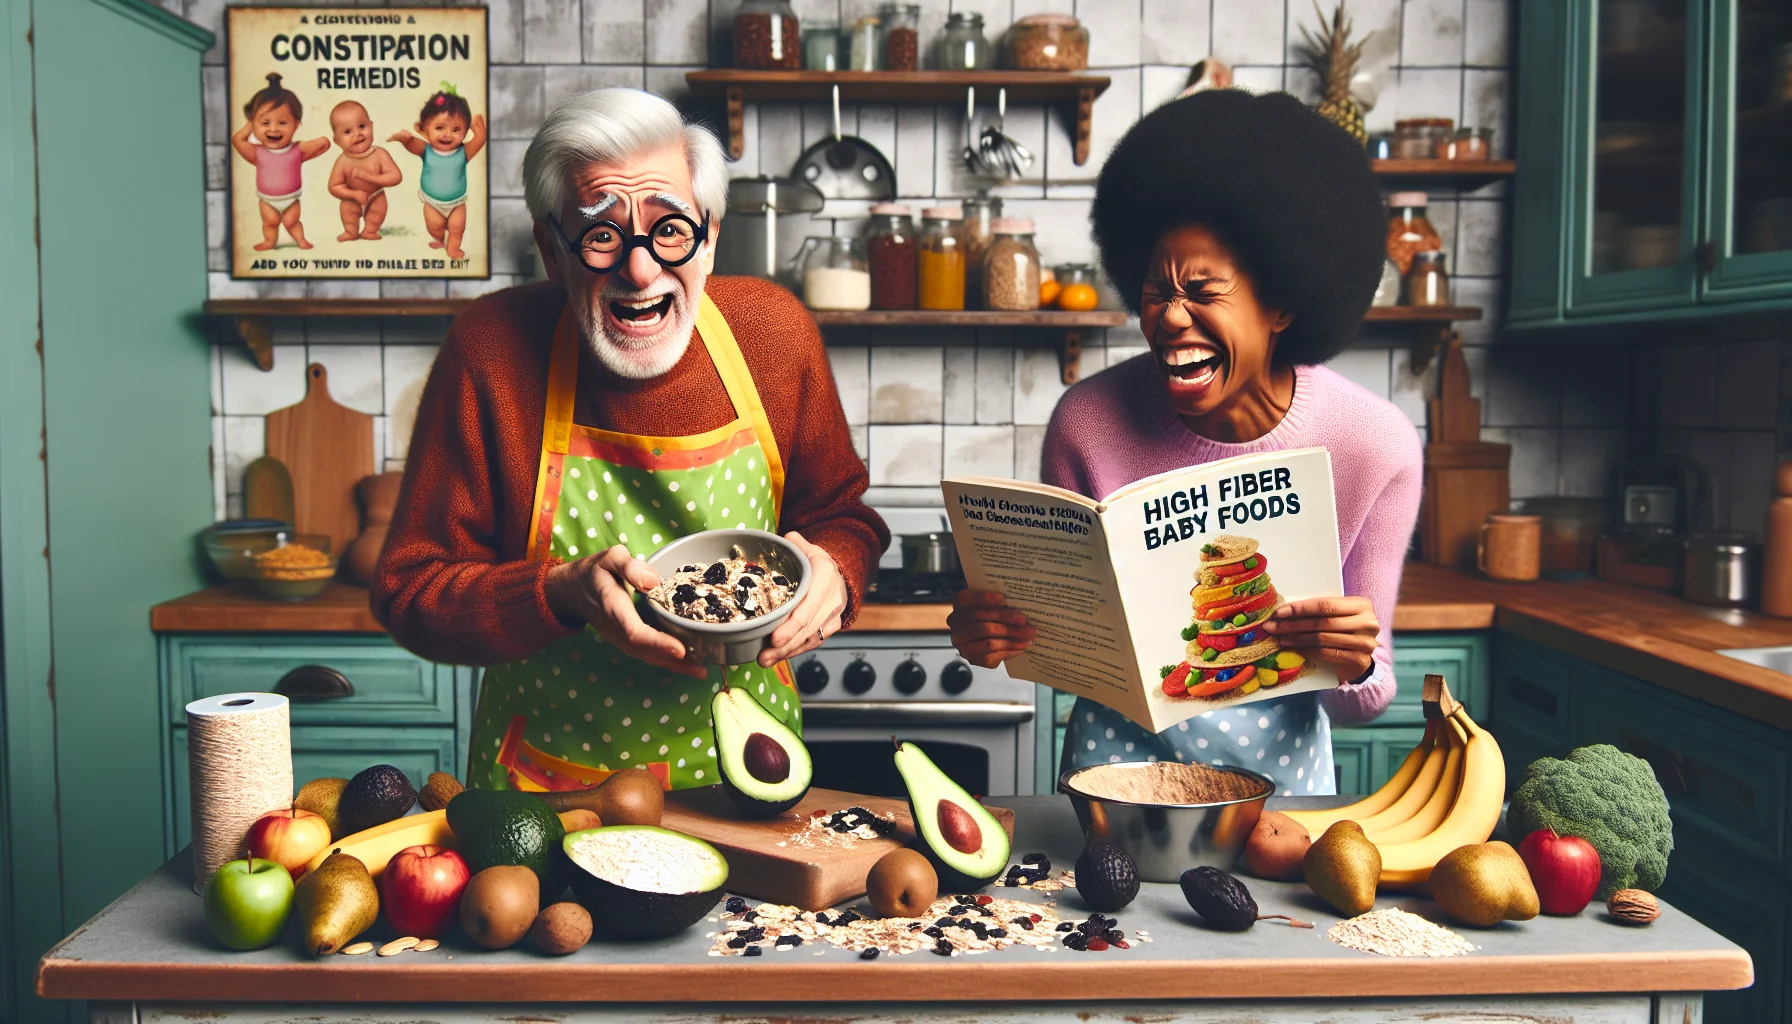 Imagine a comical scene in a quaint, homely kitchen where an elderly Caucasian man and an African-American woman are trying to prepare high fiber baby foods. The man, in bright-colored apron and glasses, is struggling to read a recipe book about constipation remedies for small kids, showing a page full of fruits, vegetables, and cereals. The woman is laughing at his confused expression while attempting to blend a spread of avocado, bananas, and oats. Surrounding them are also prunes, pears, peas, brown rice, and whole wheat pasta. Let's also include a funny poster in the kitchen about the importance of diets and eating healthy.